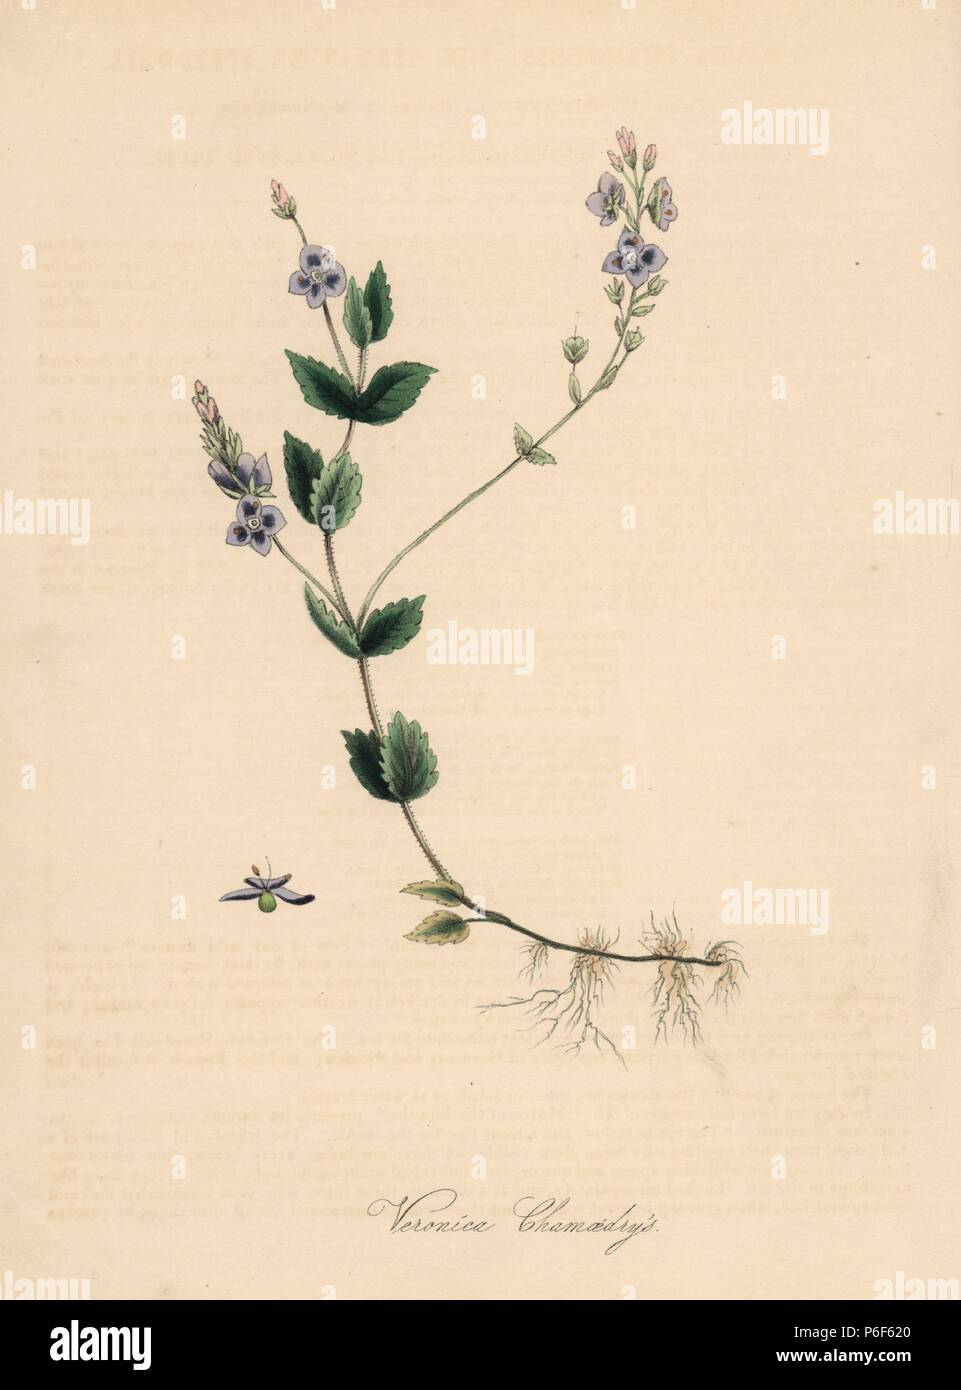 Germander speedwell, Veronica chamaedrys. Handcoloured zincograph by C. Chabot drawn by Miss M. A. Burnett from her 'Plantae Utiliores: or Illustrations of Useful Plants,' Whittaker, London, 1842. Miss Burnett drew the botanical illustrations, but the text was chiefly by her late brother, British botanist Gilbert Thomas Burnett (1800-1835). Stock Photo